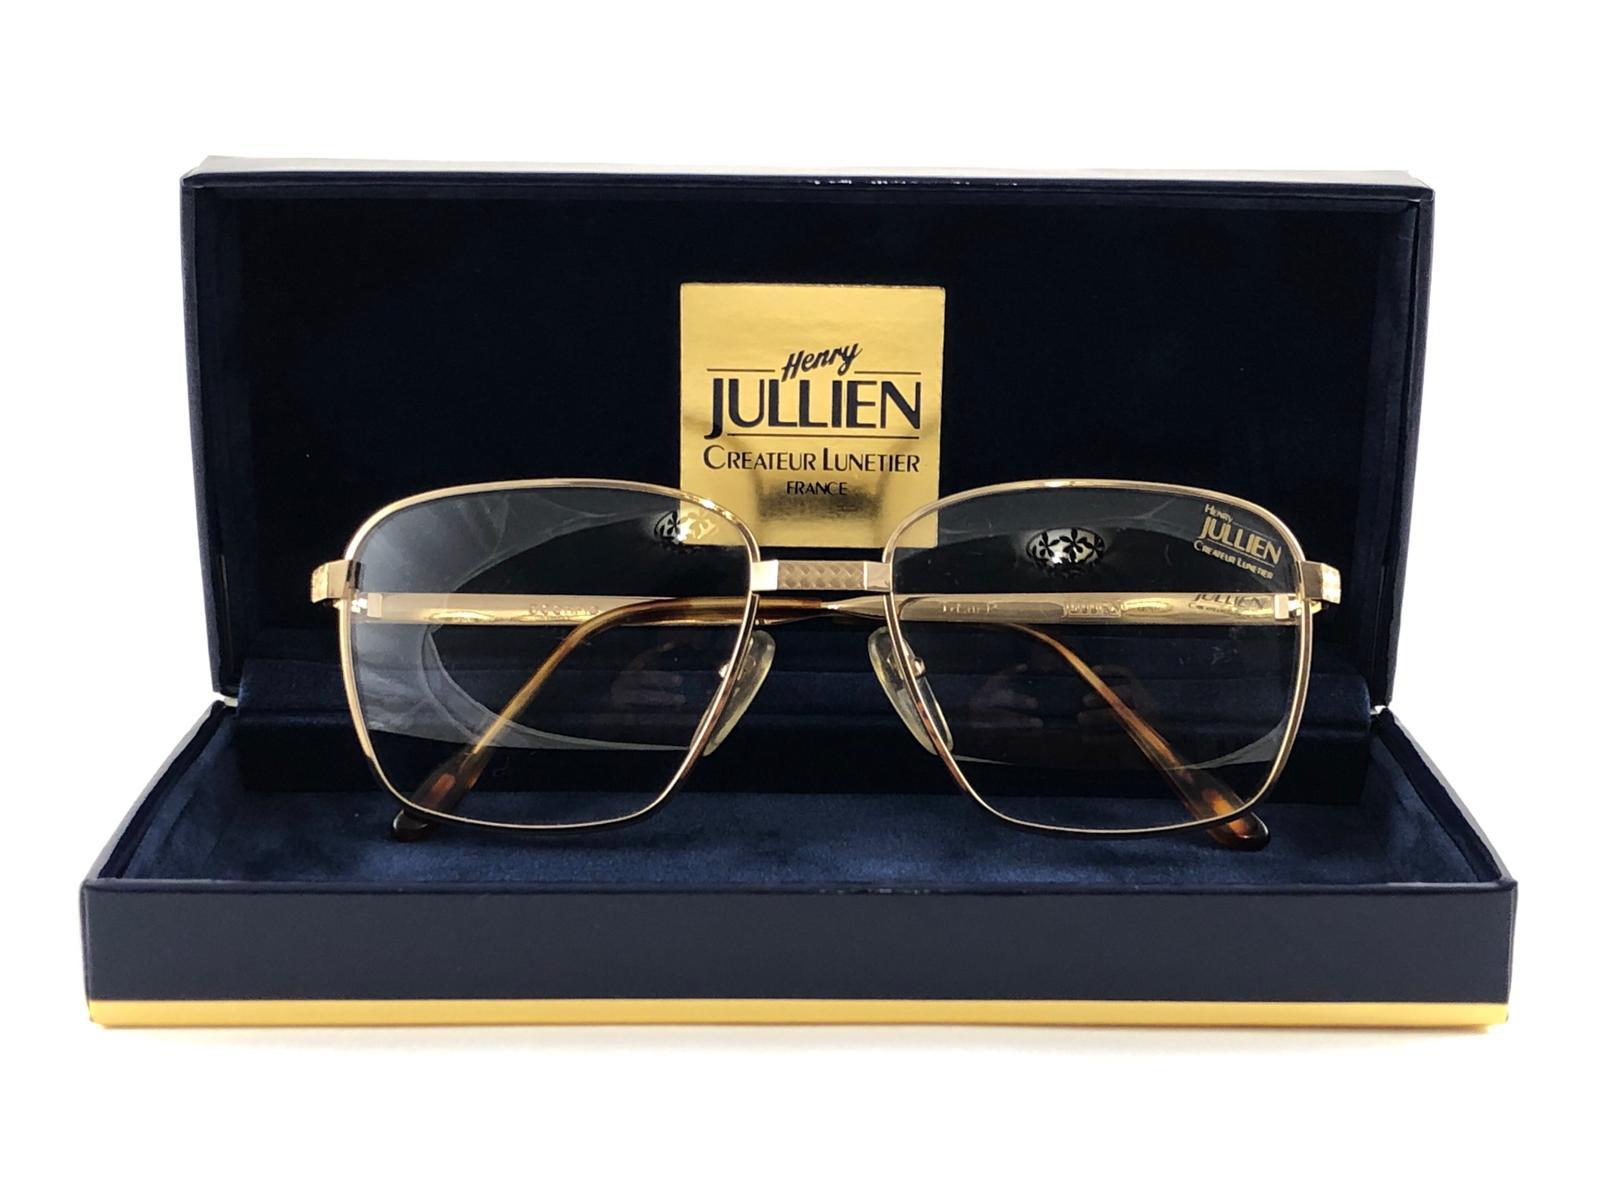 New Henry Jullien gold plated frame. Ready for prescription lenses.

Made in France
 
Produced and design in 1990's.

This item may show minor sign of wear due to storage.

FRONT 13.5 CMS
LENS HEIGHT 4.5 CMS
LENS WIDTH 5.2 CMS